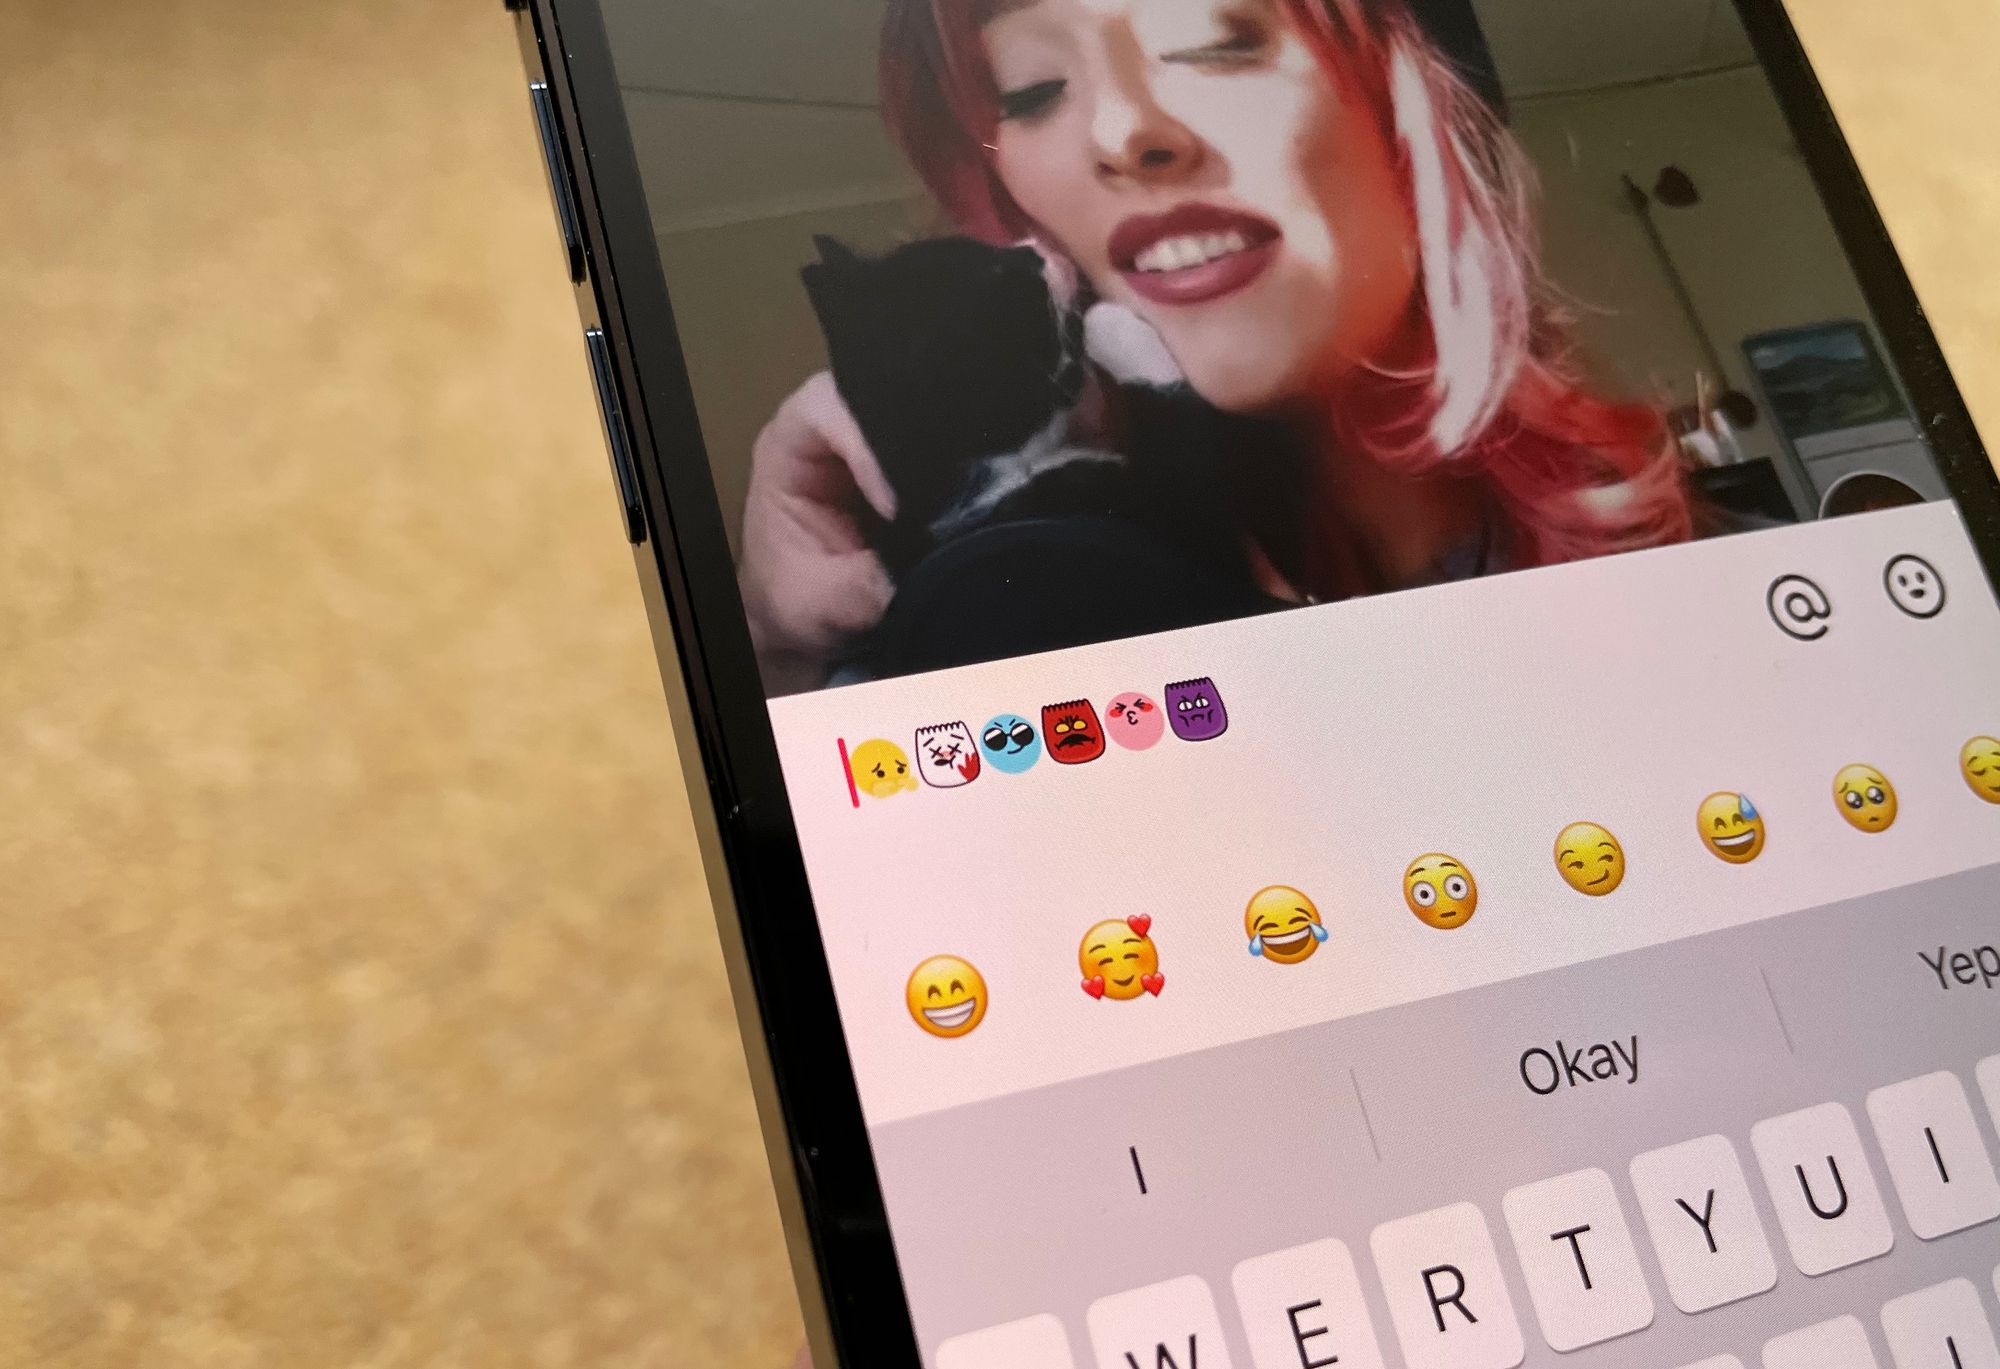 What Does the 🗿 Emoji Mean on TikTok? Why It's Everywhere